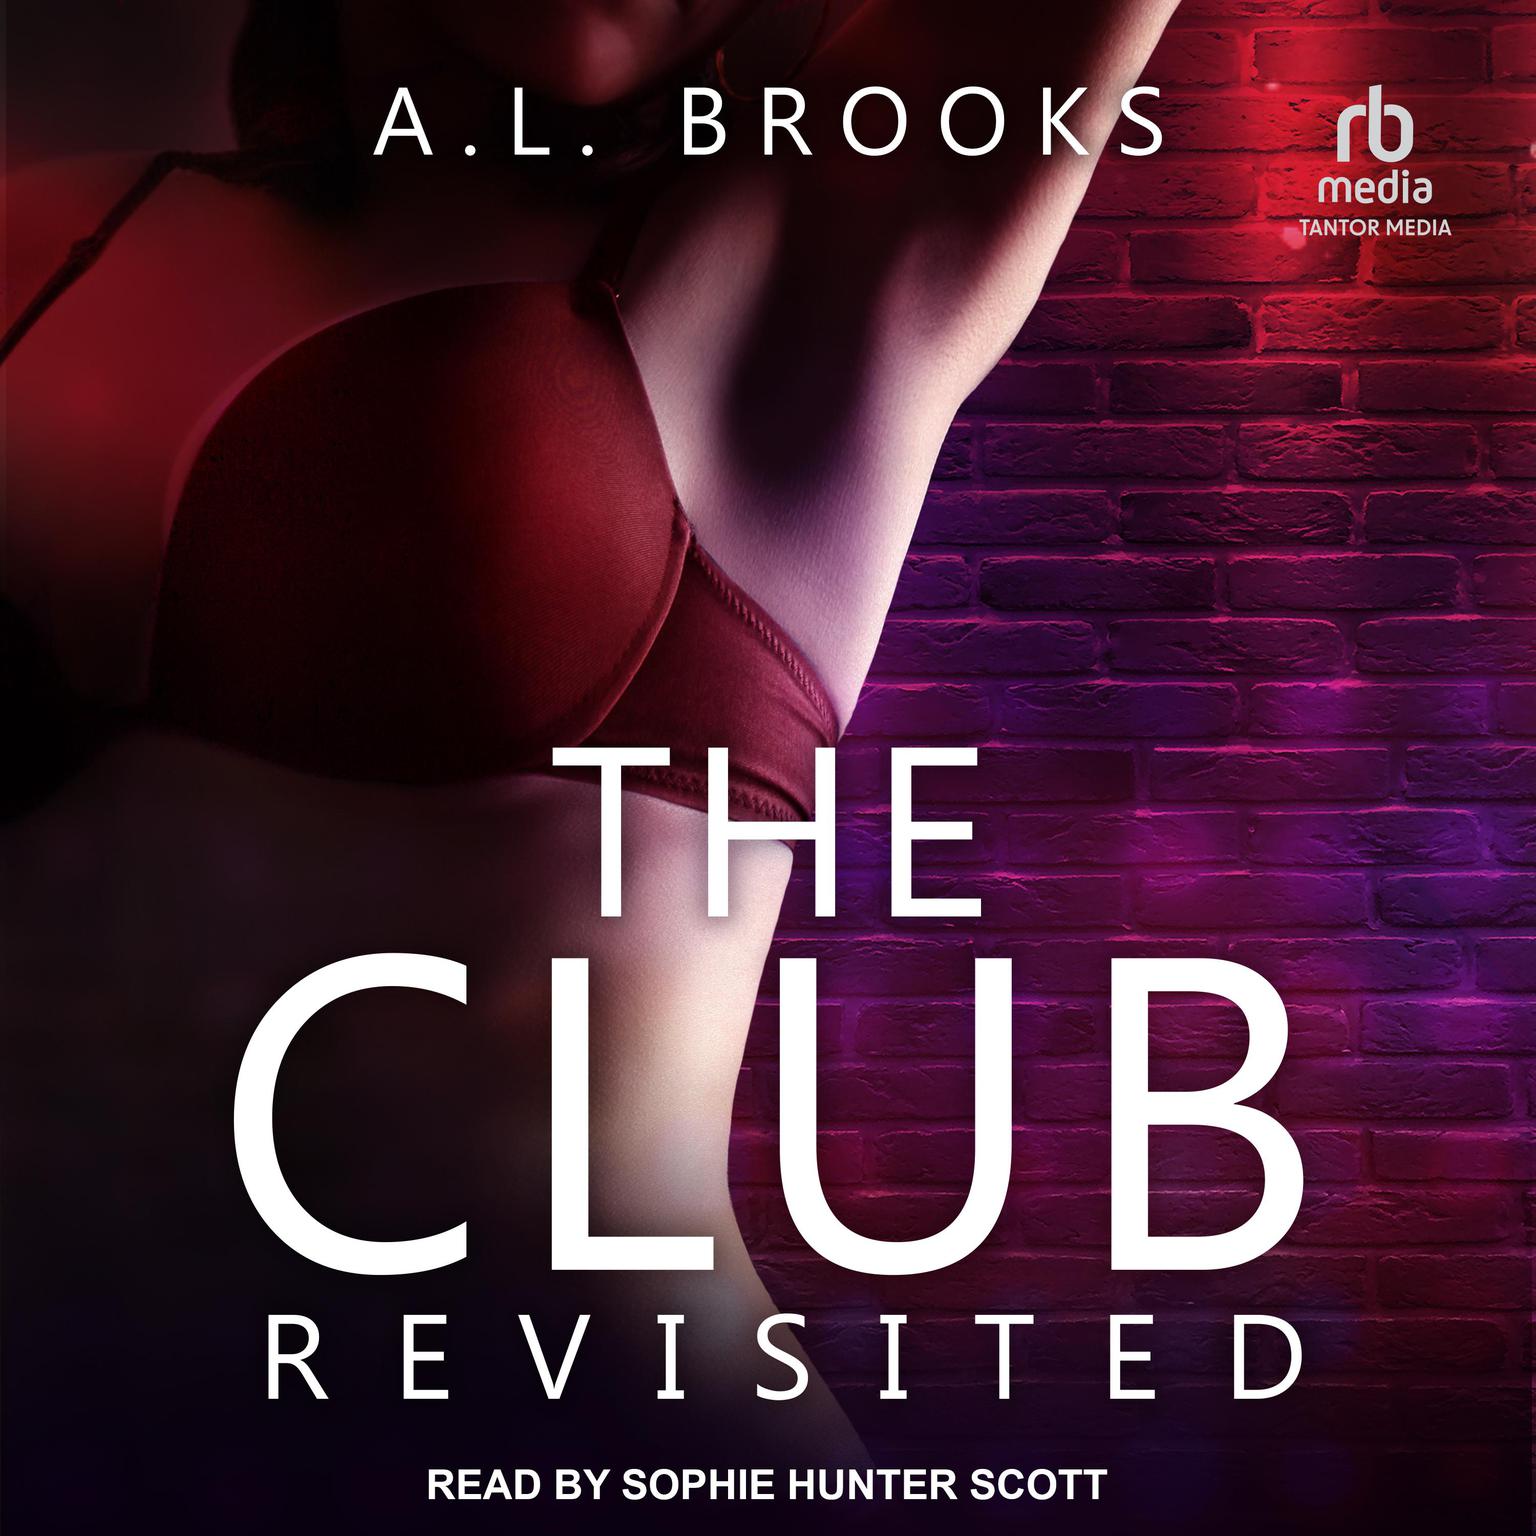 The Club Revisited Audiobook, by A.L. Brooks